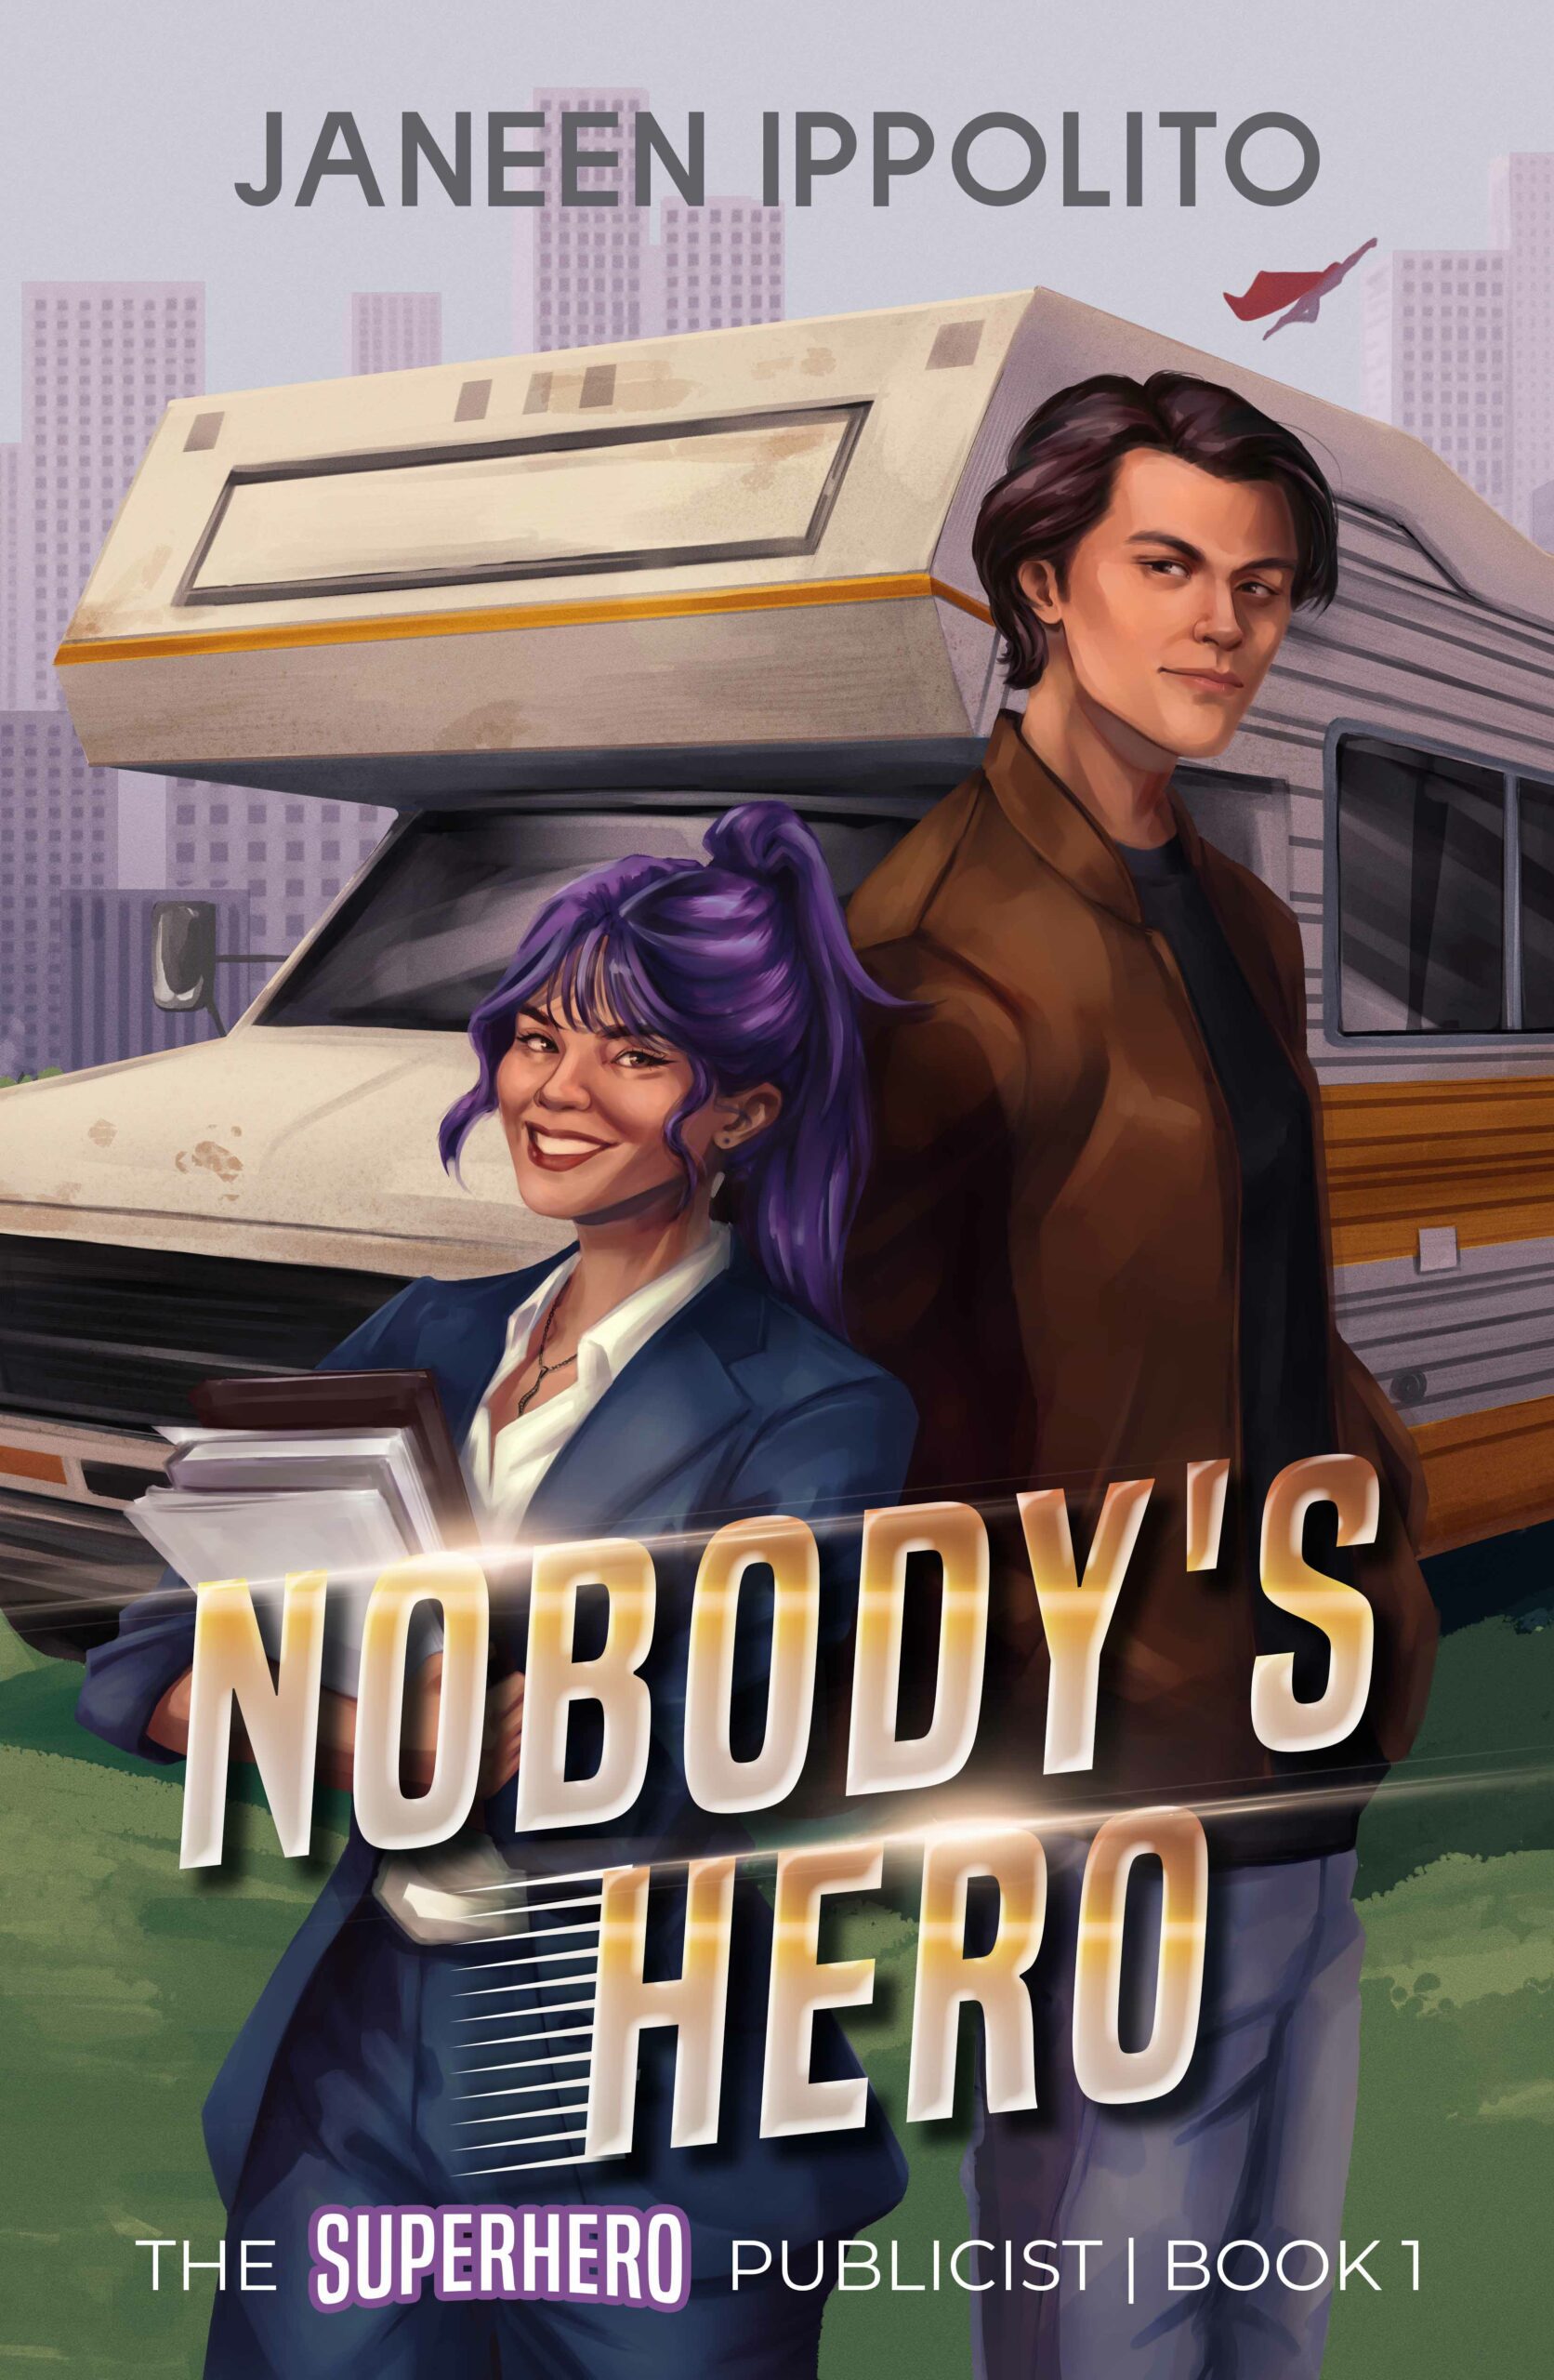 An image of the ebook cover for the superhero book Nobody's Hero written by Janeen Ippolito. A female figure and a male figure standing back to back in front of a campervan with a superhero flying in the background.